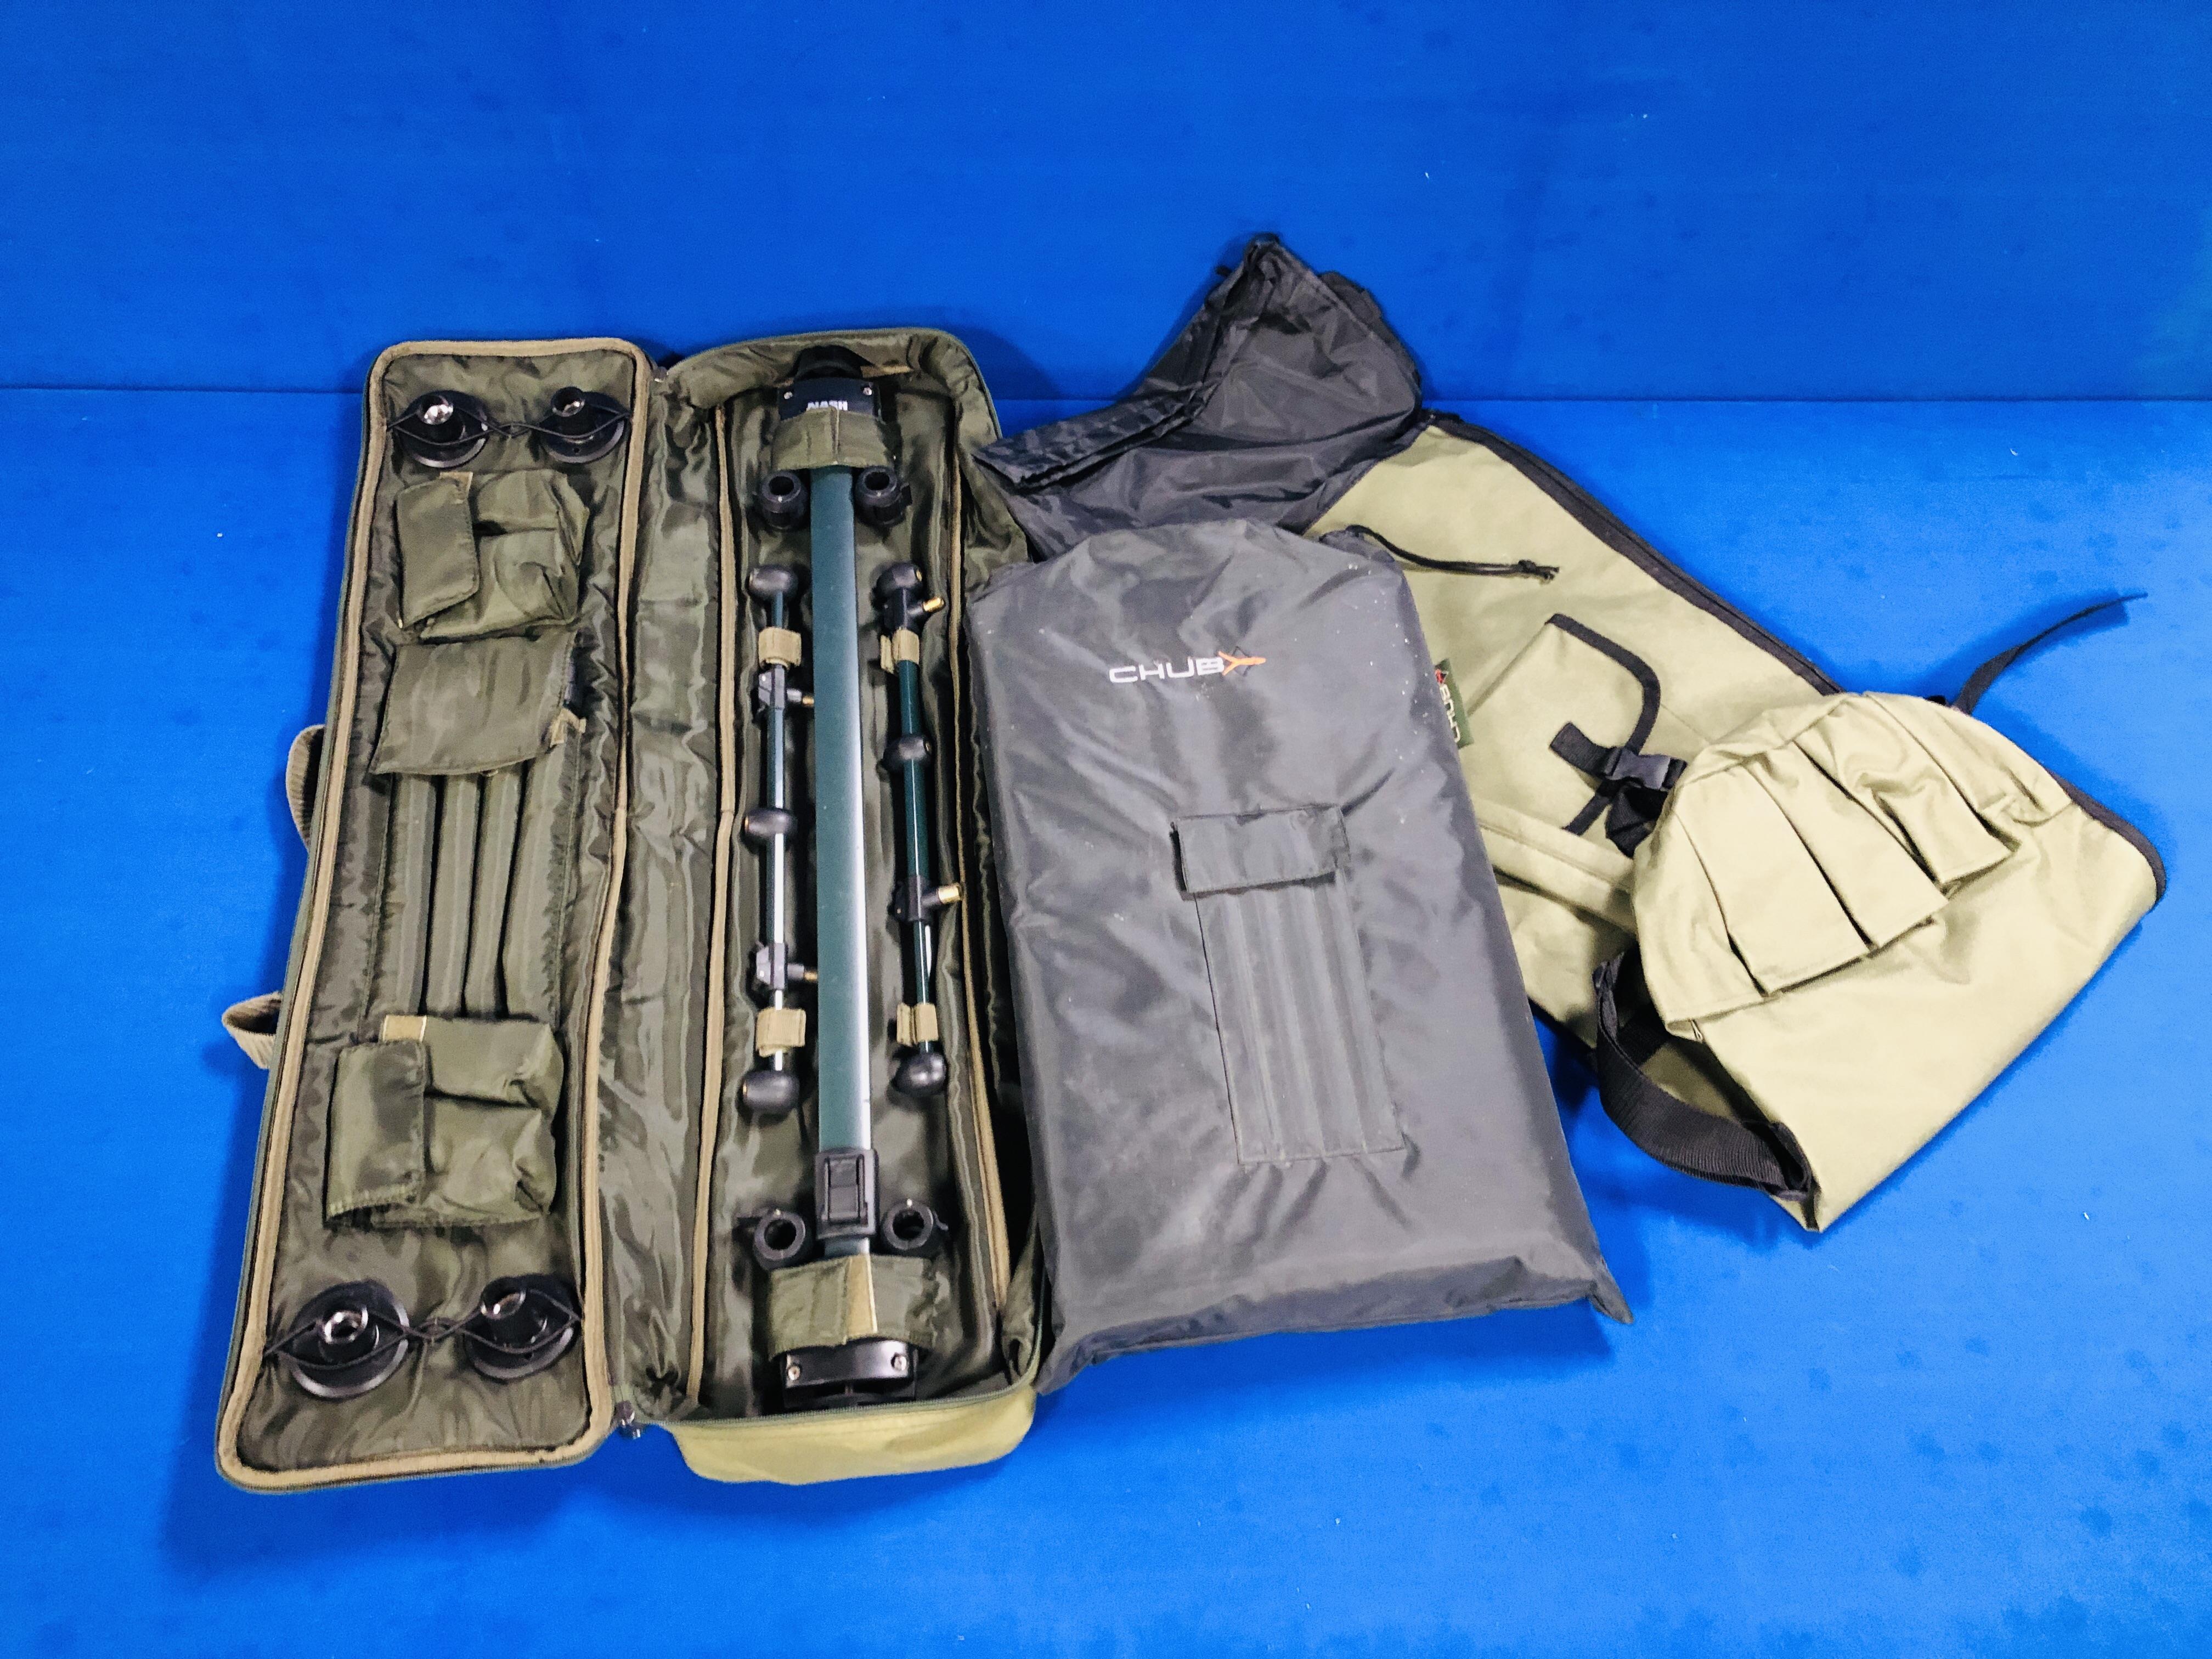 A NASH 3 POINT ROD REST IN PROTECTIVE TRANSIT BAG,